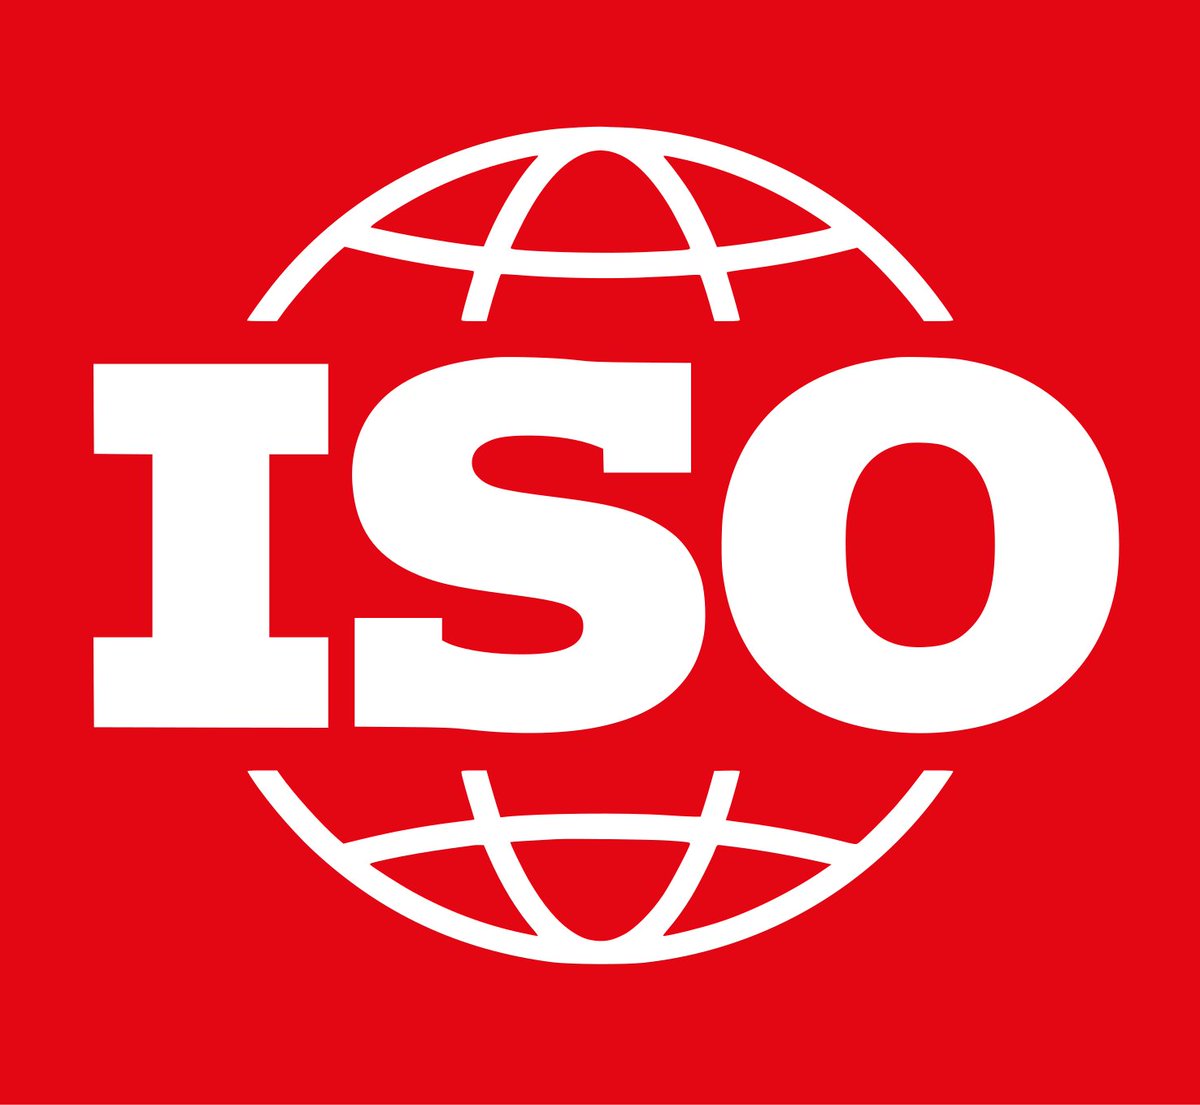 Have you heard about #ISO31030 – the new International Standard for Travel Risk Management? The @locationsafety team have been involved in its development. Find out why ISO31030 is so important by visiting stand BTSH112. #BTSEurope #travelreunited